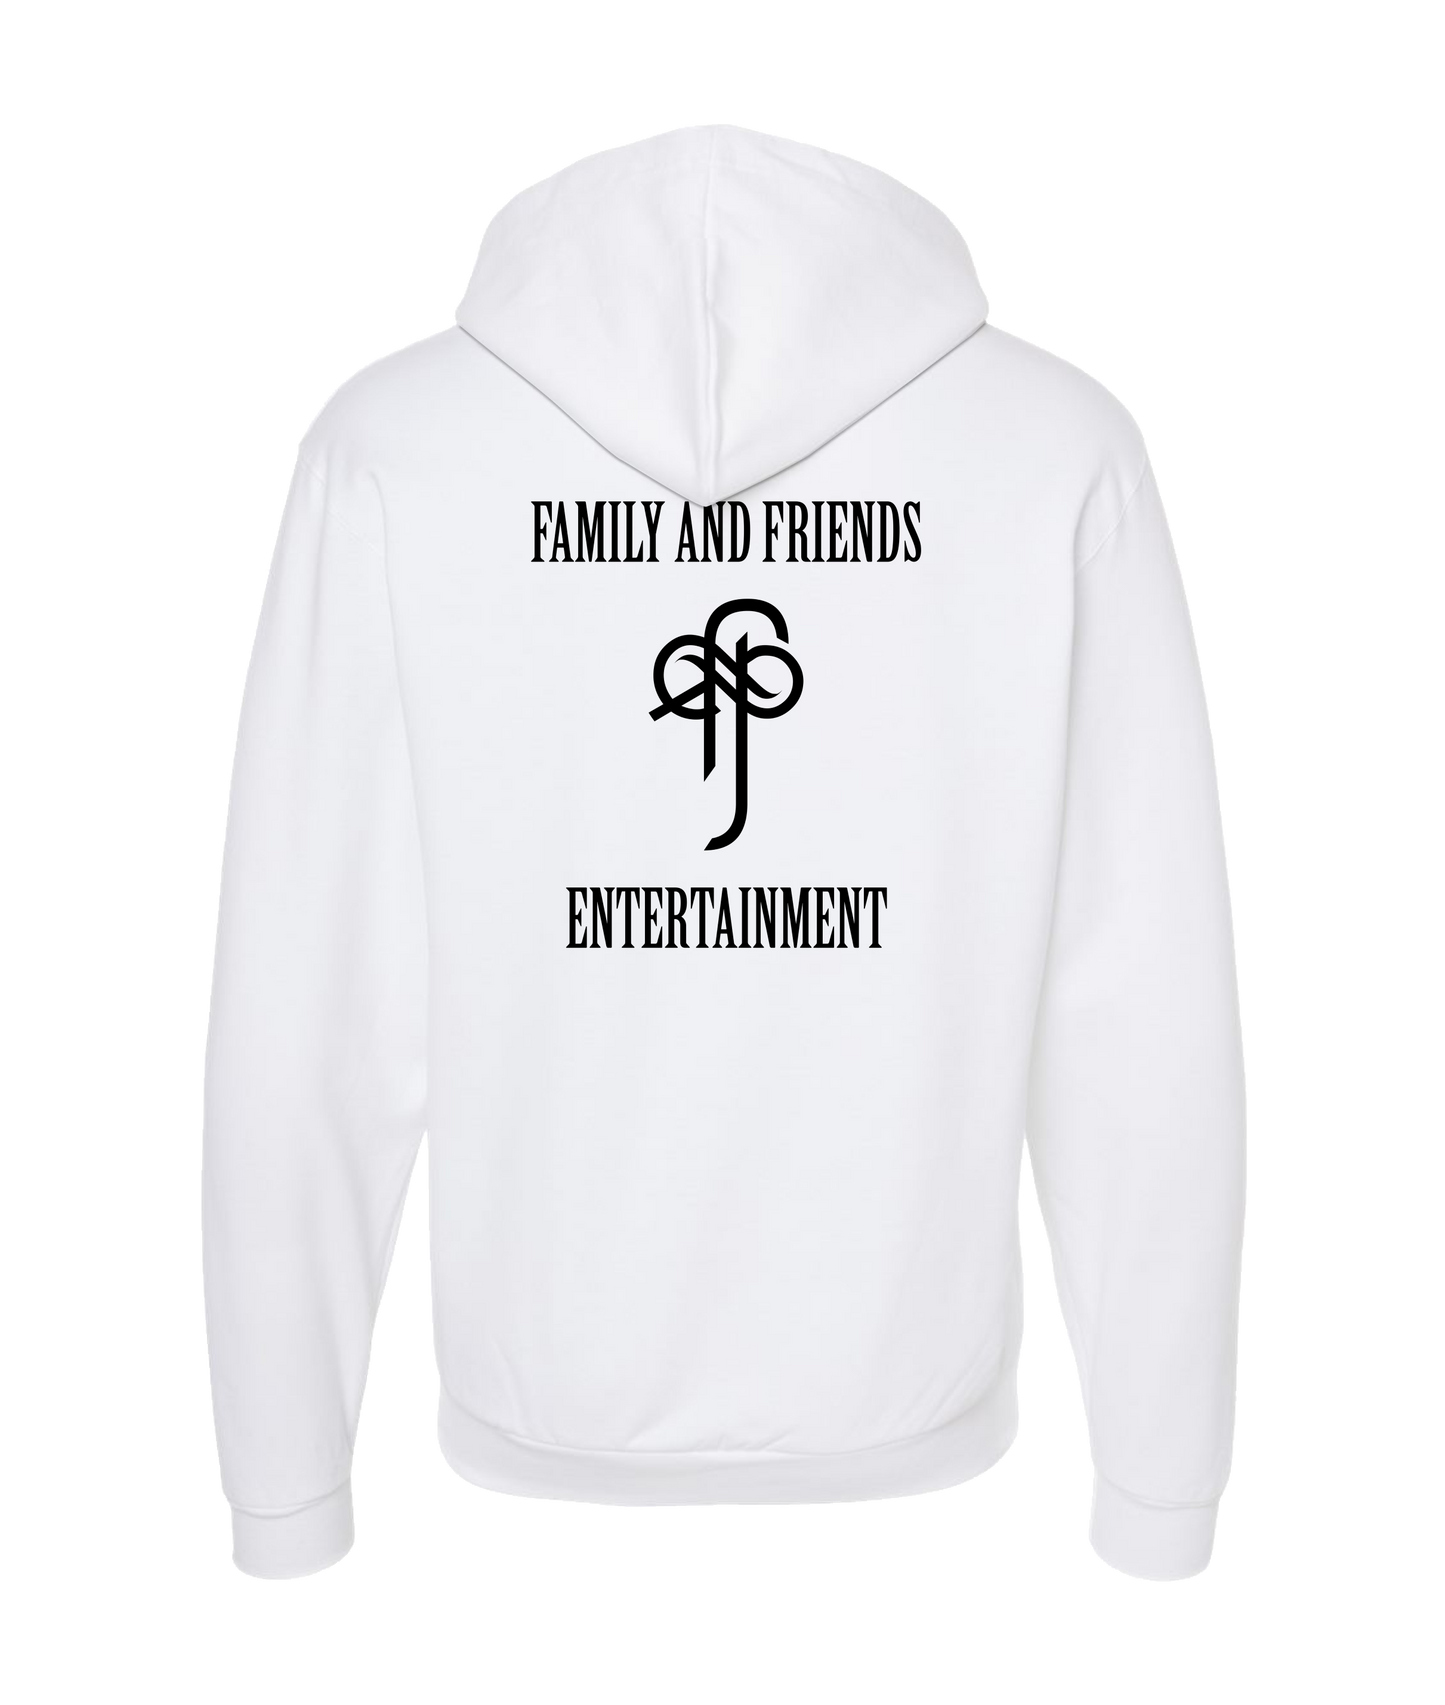 Sincrawford - Family and Friends Ent.  - White Zip Up Hoodie